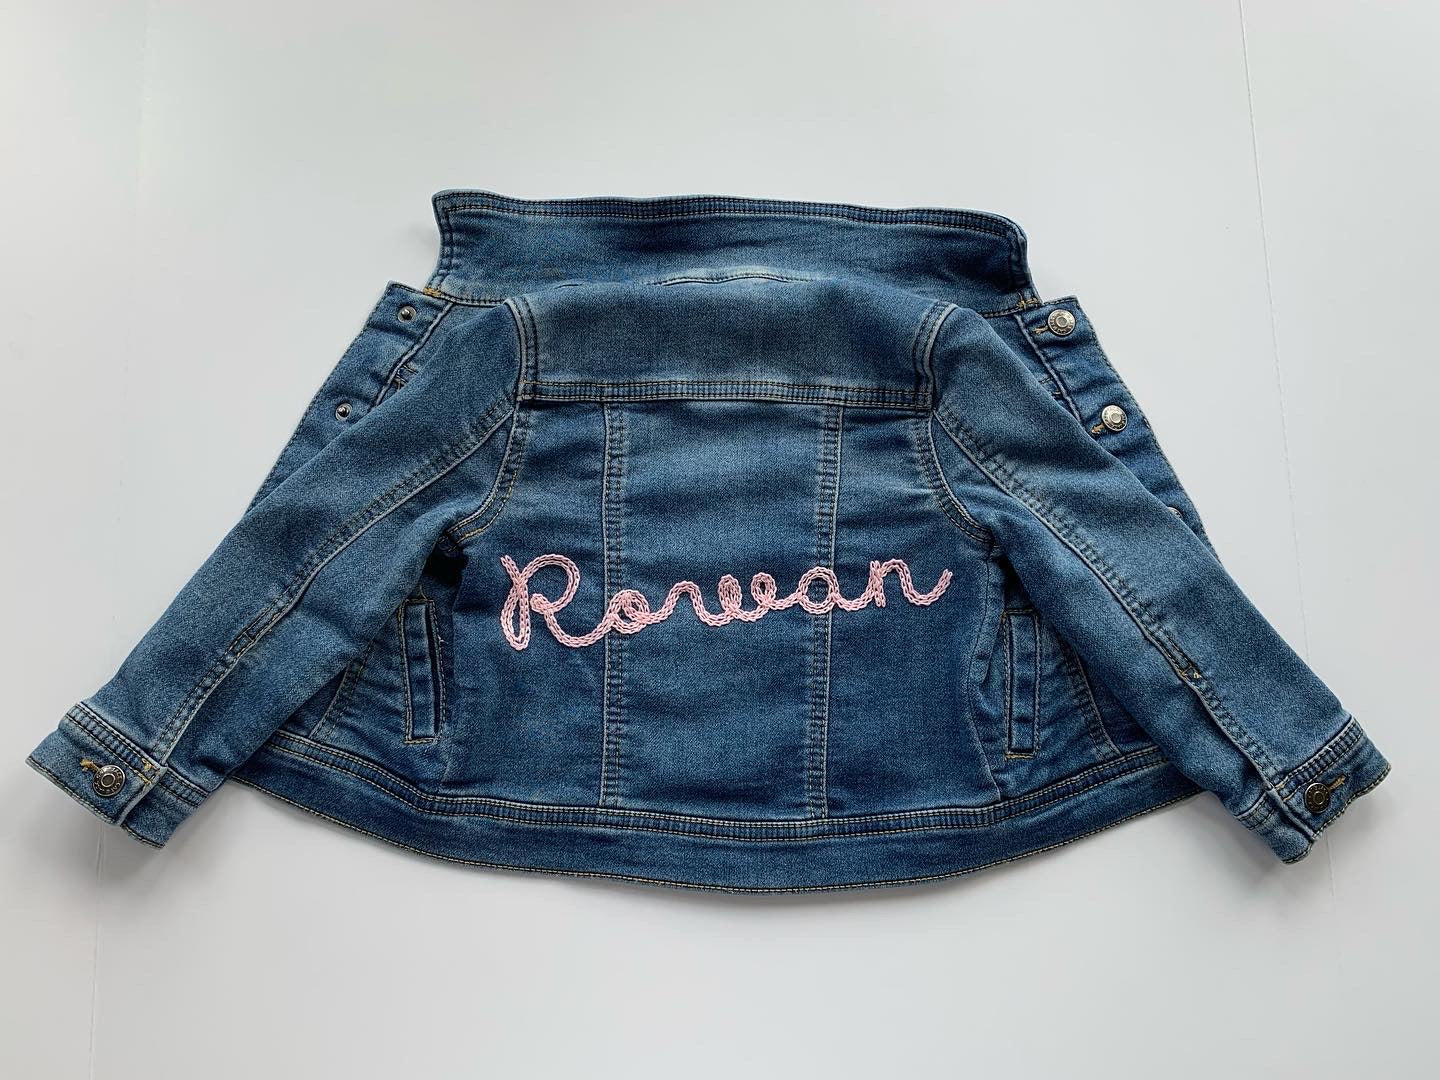 Custom Patch Jacket Custom Jean Jacket With Patches and Name